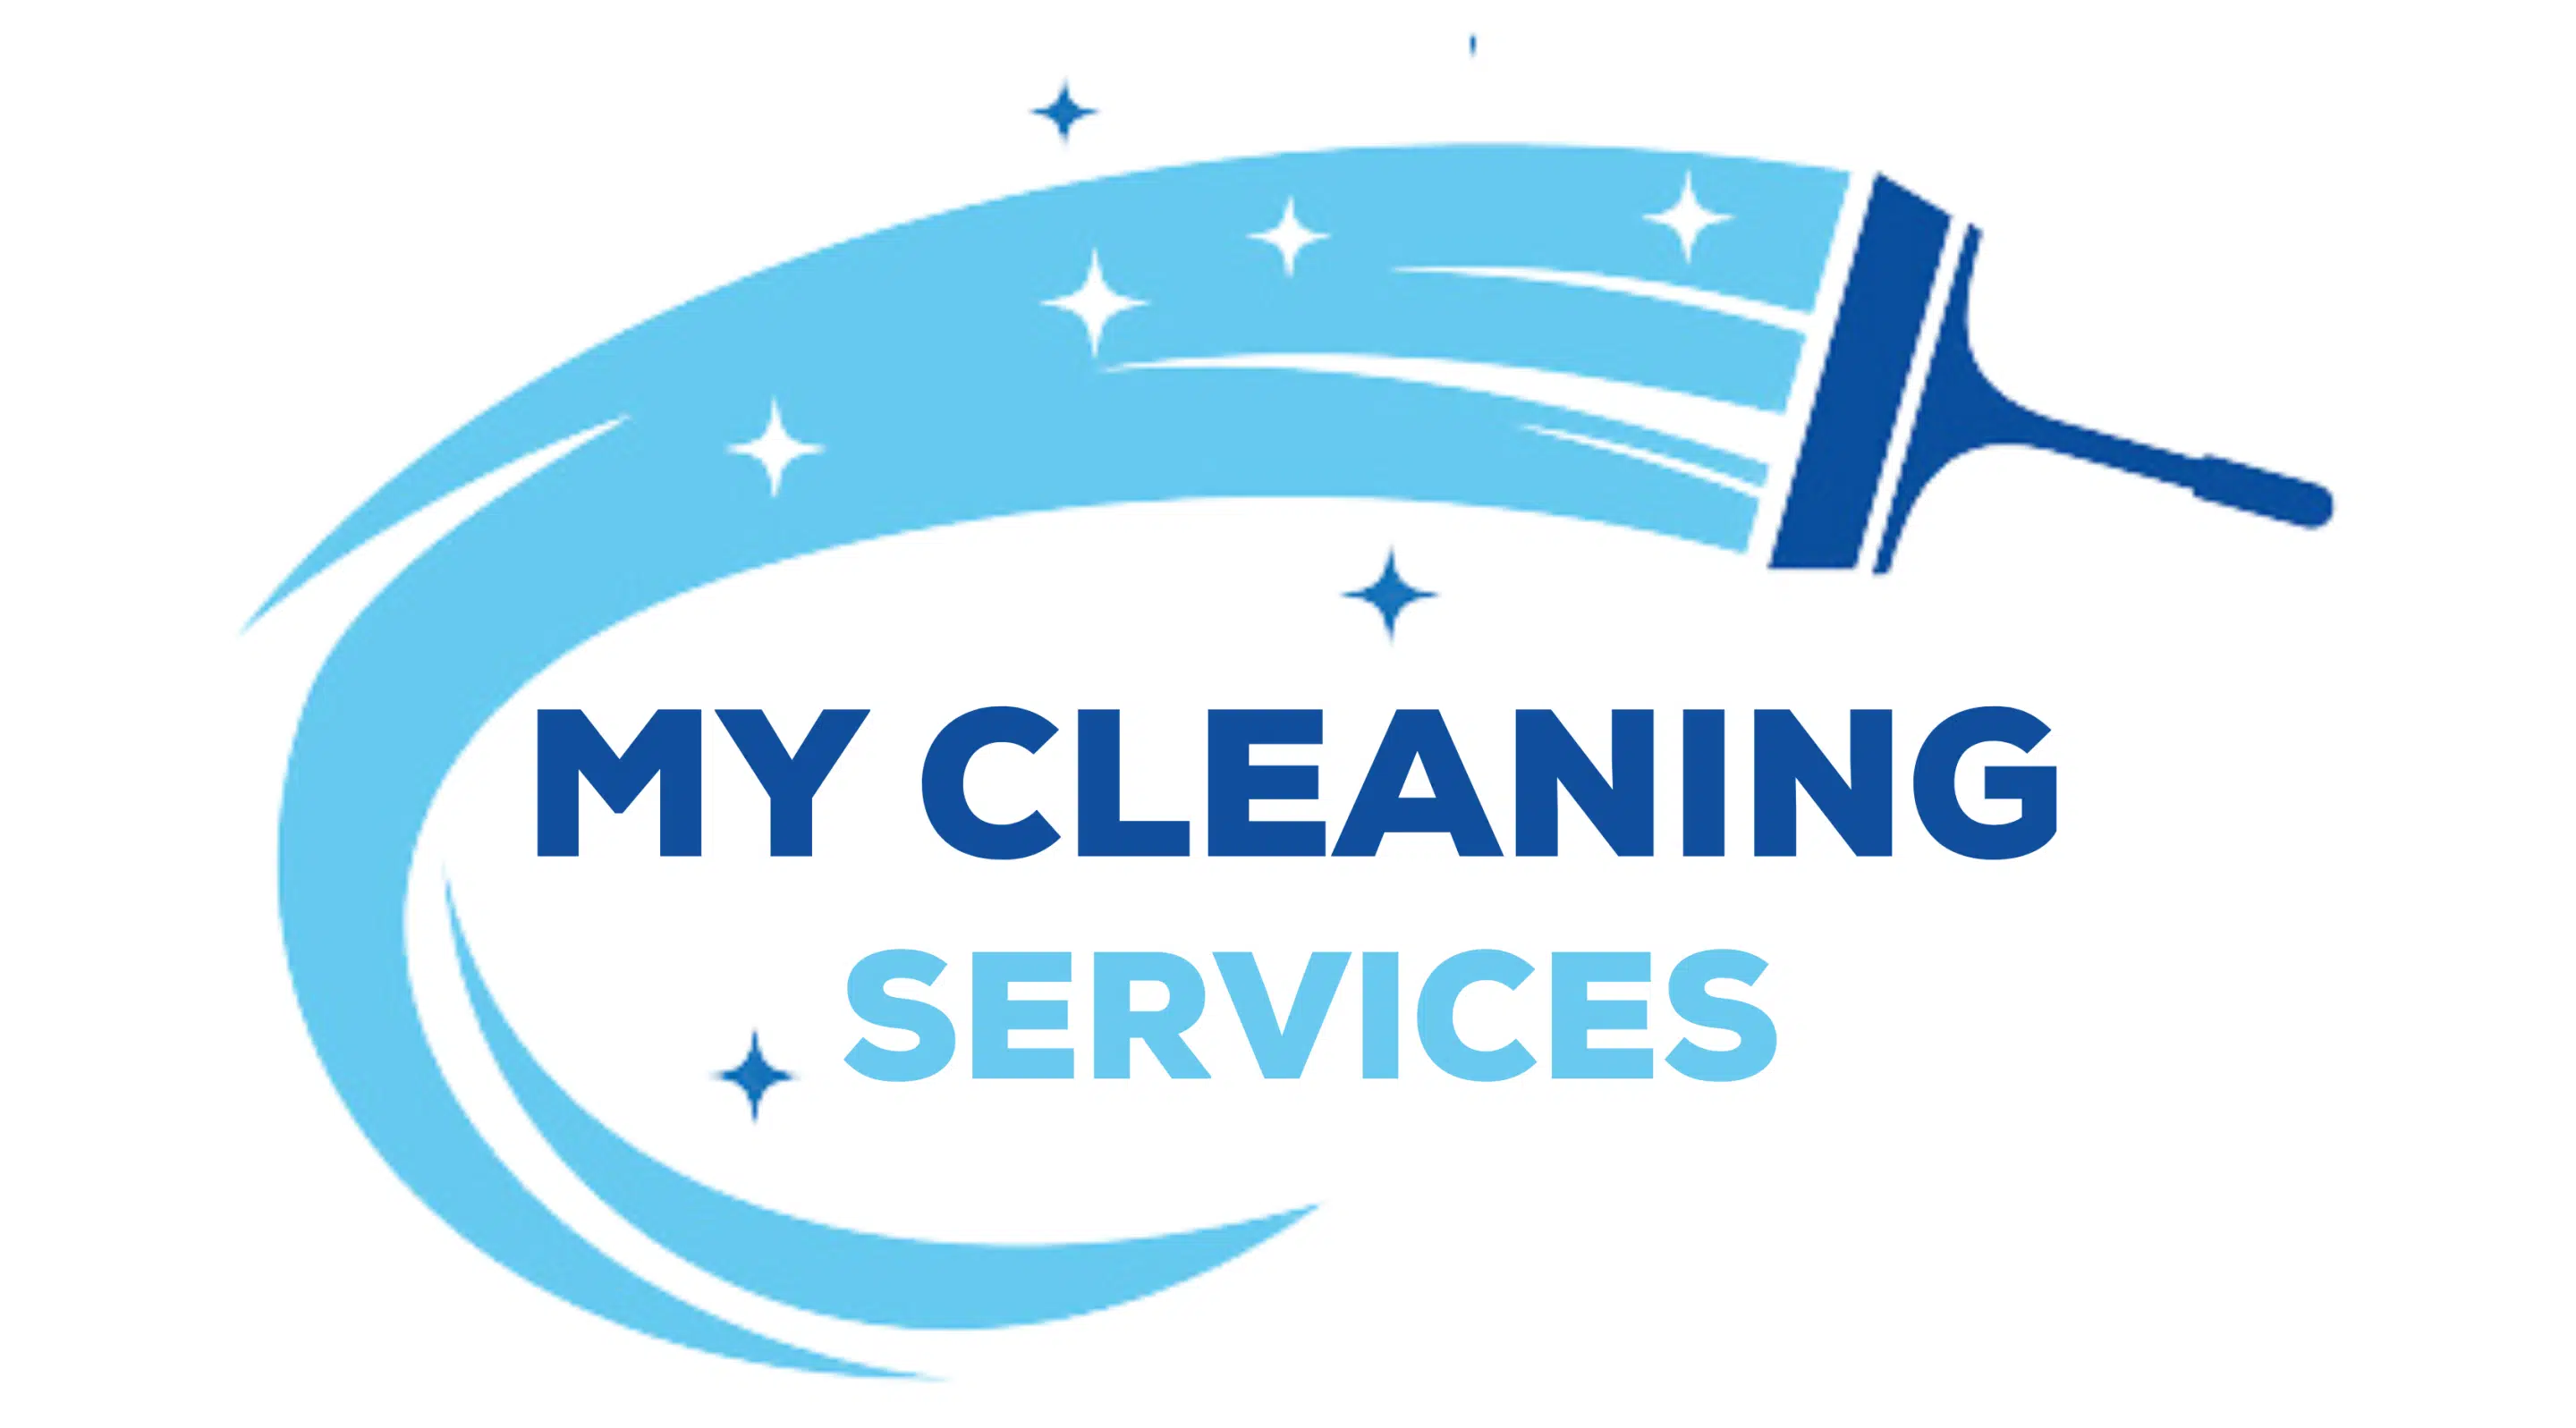  My Cleaning Services 